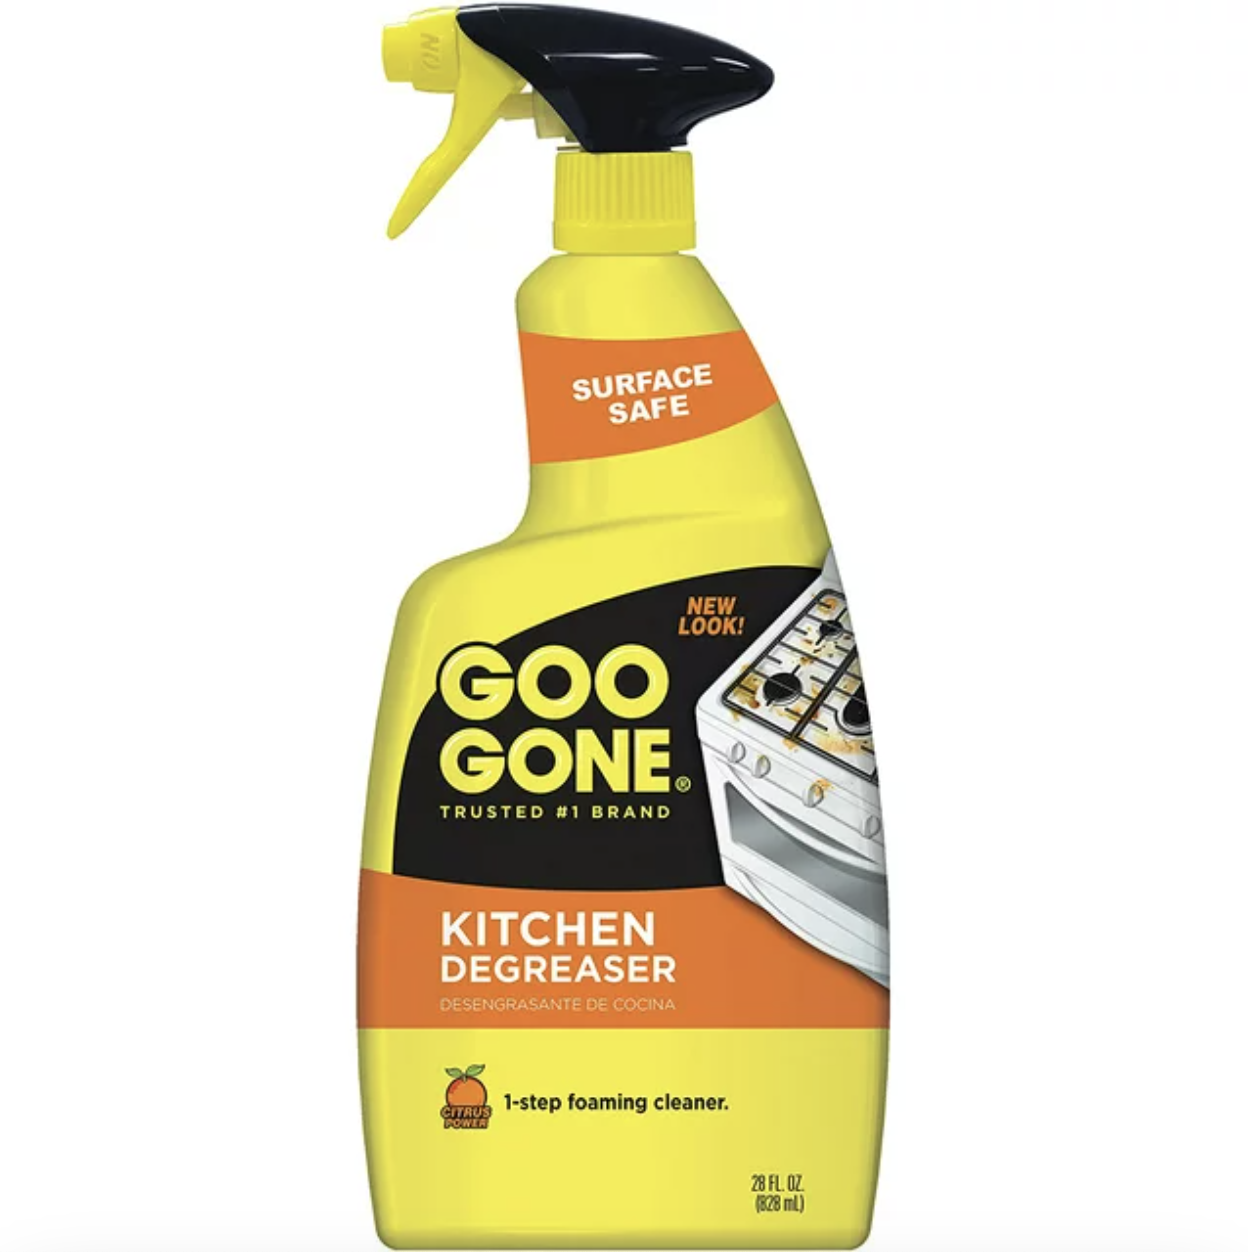 Bottle of Goo Gone Kitchen Degreaser with spray nozzle